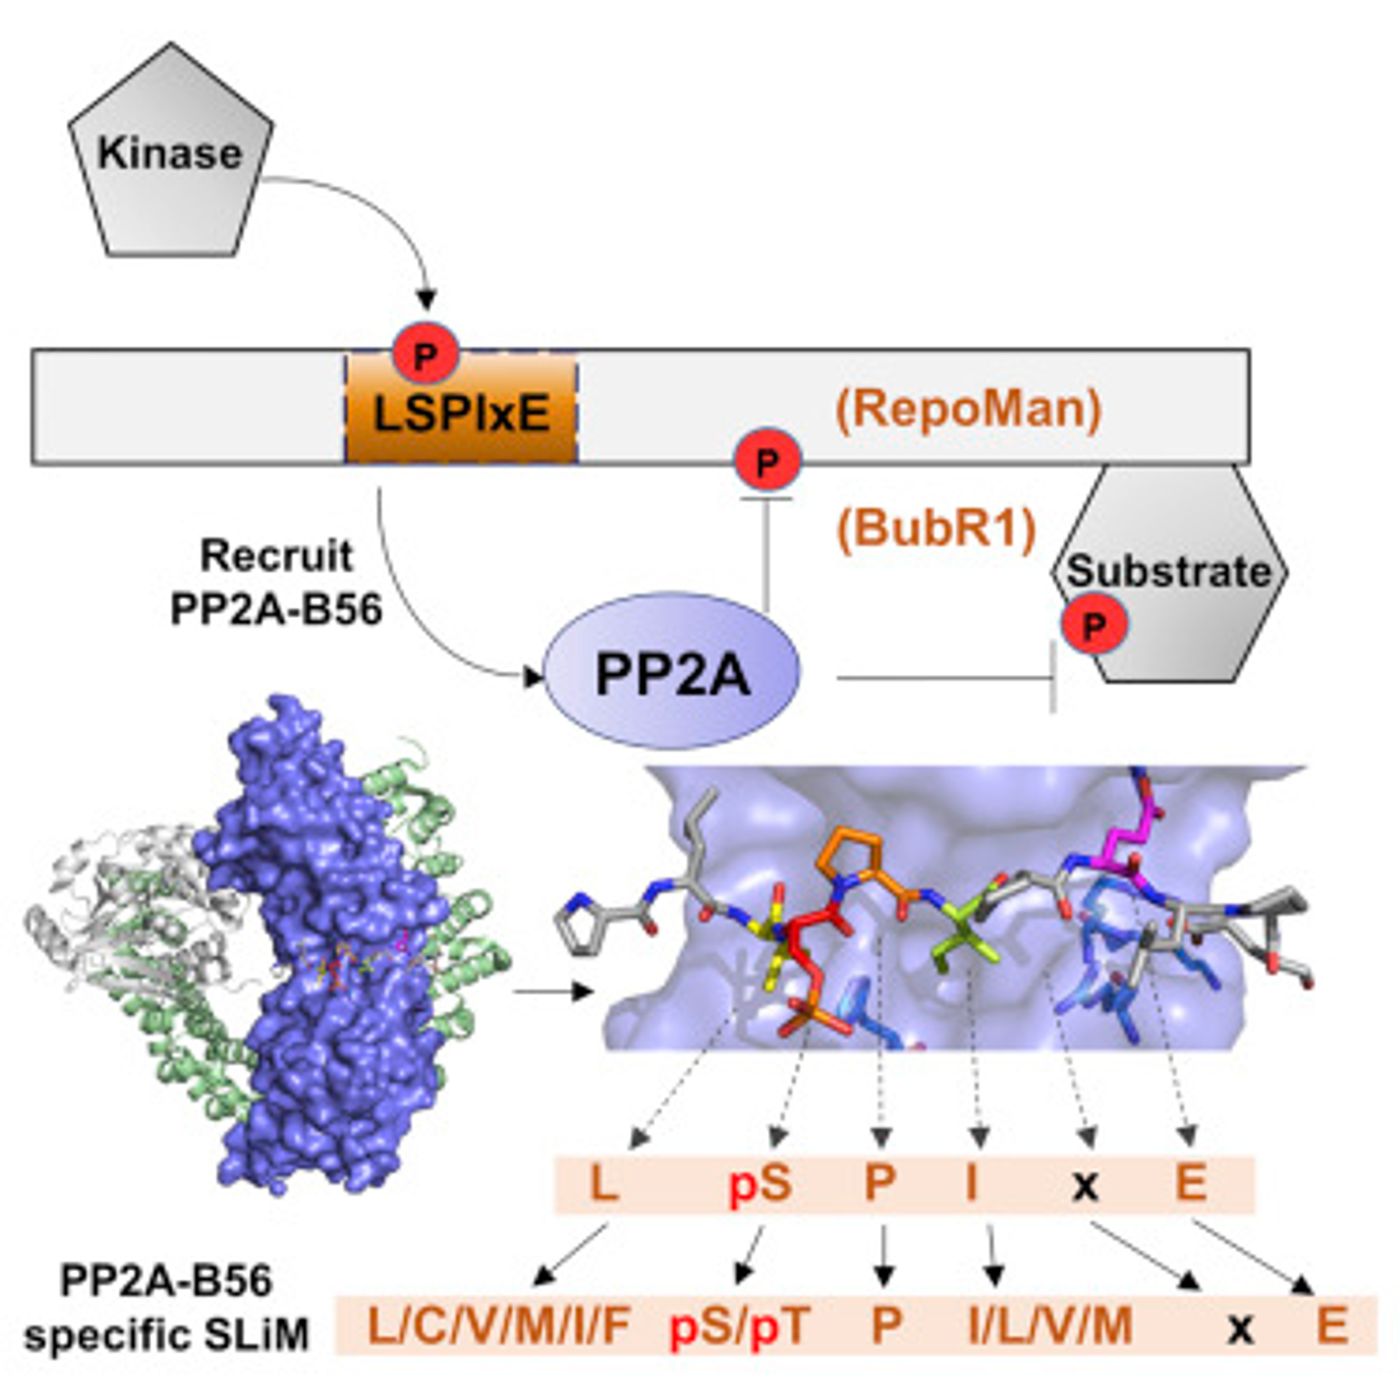  Graphical abstract: Structure Wang et al 2016. Crystal structures of PP2A B56 complex with phosphorylated RepoMan and BubR1. The PP2A-B56 specific short linear motif is L-pS-P-I-x-E. Over 100 proteins that likely bind PP2A were identified via this motif.